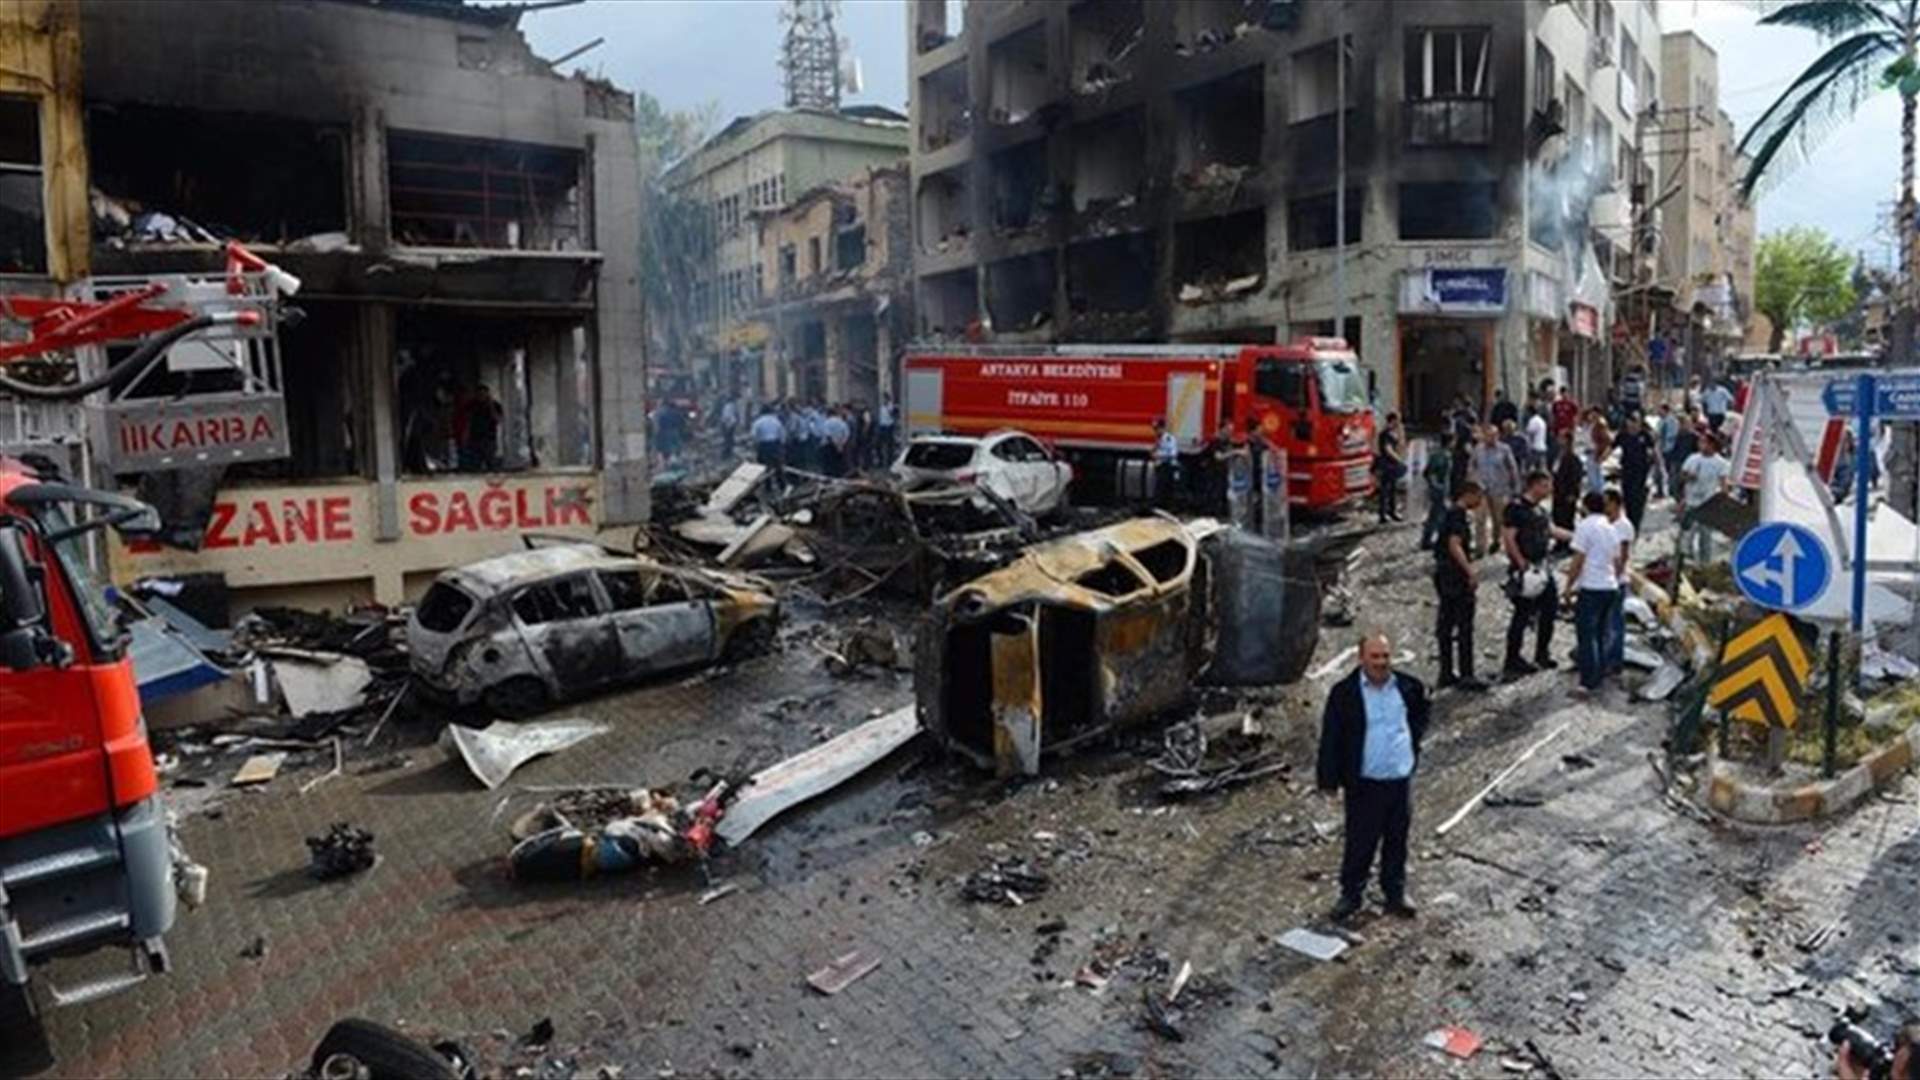 Car bomb attack kills two police, wounds 35 in southeast Turkey - security sources